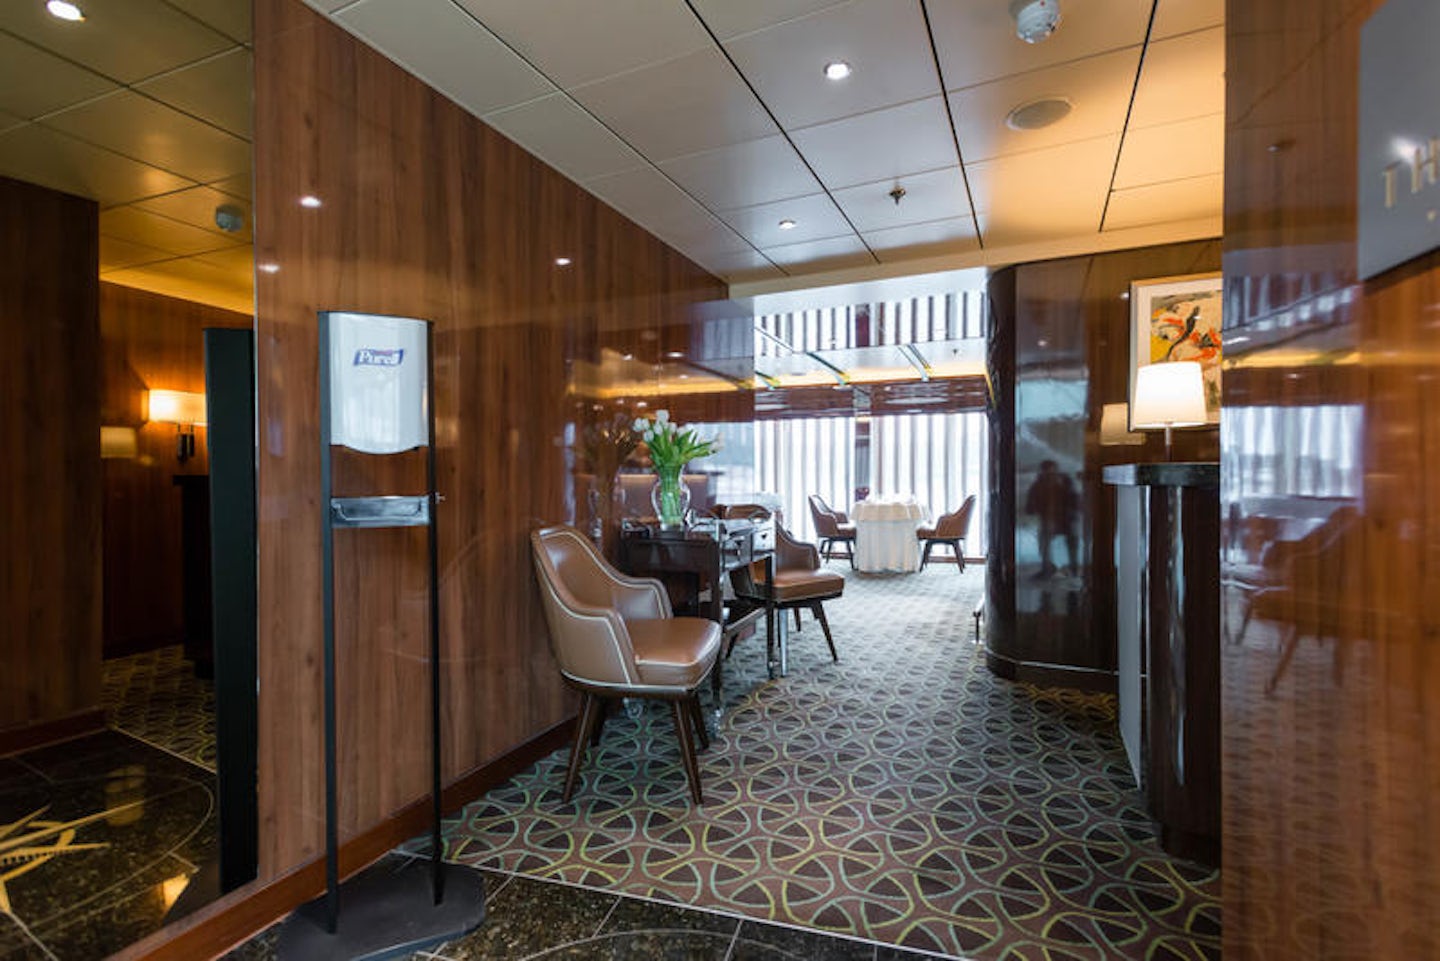 The Grill Restaurant on Seabourn Quest